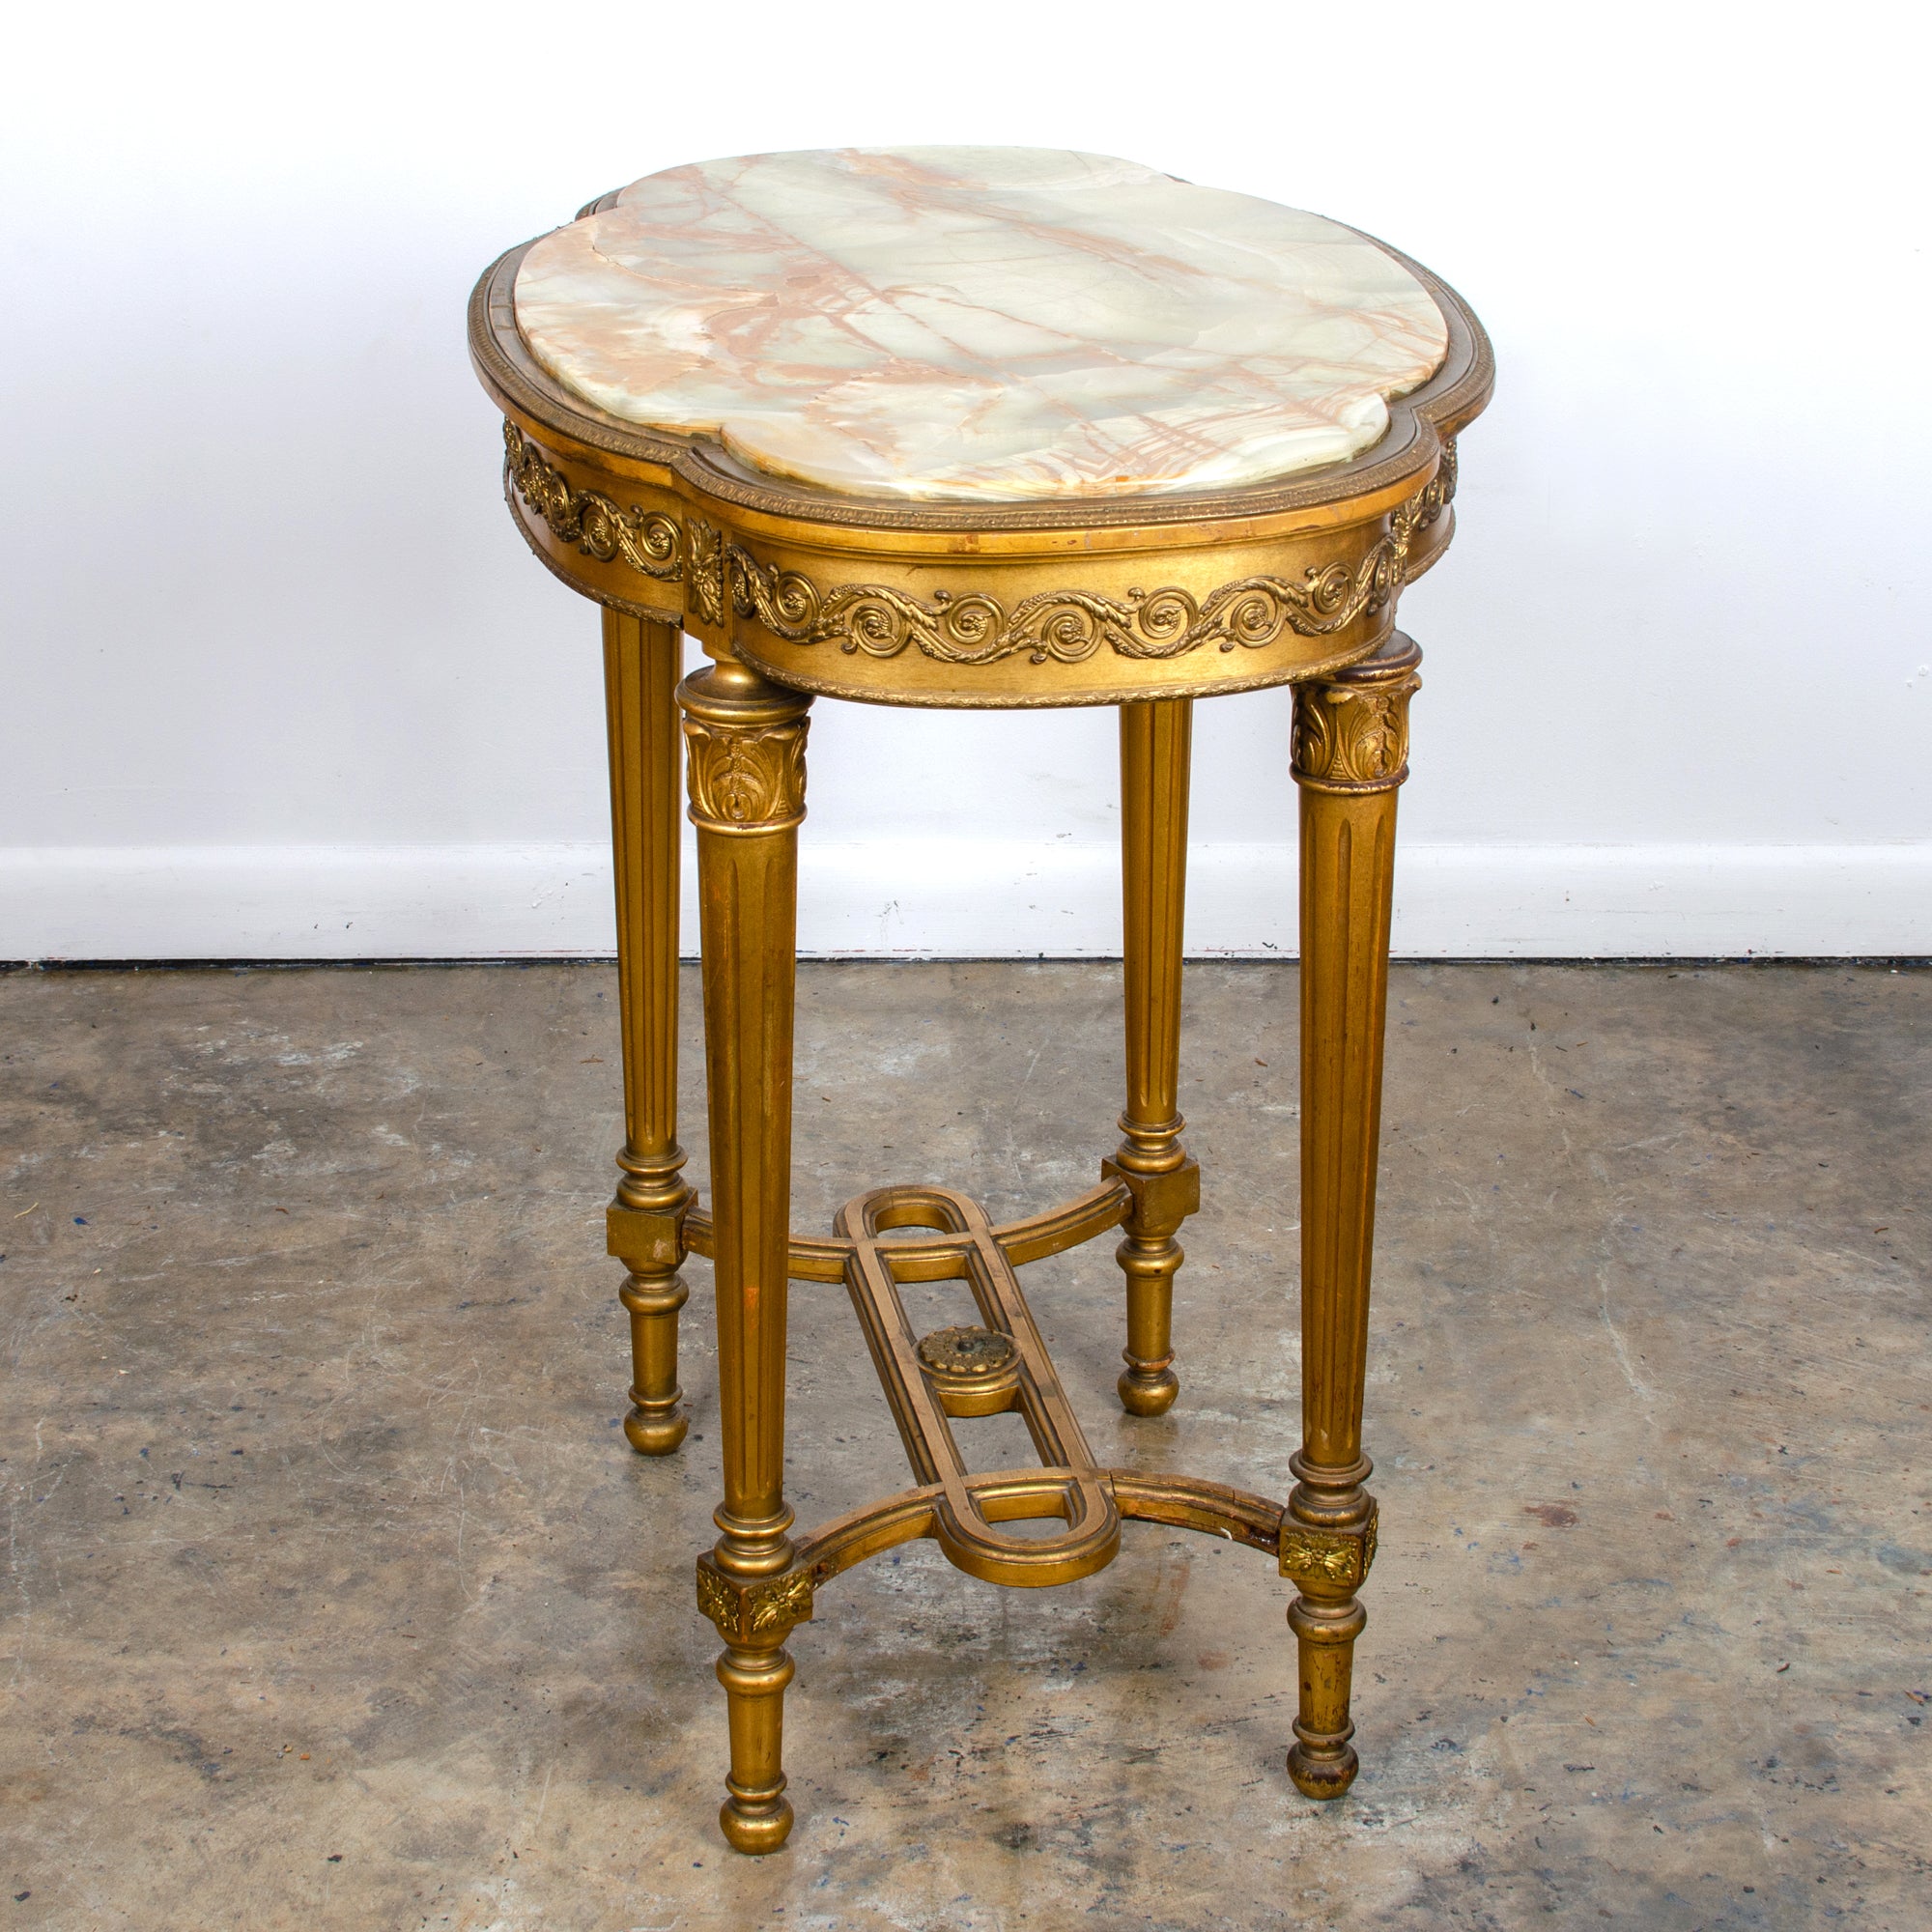 Louis XVI Style Onyx Top Gilded Center Table, c.1890